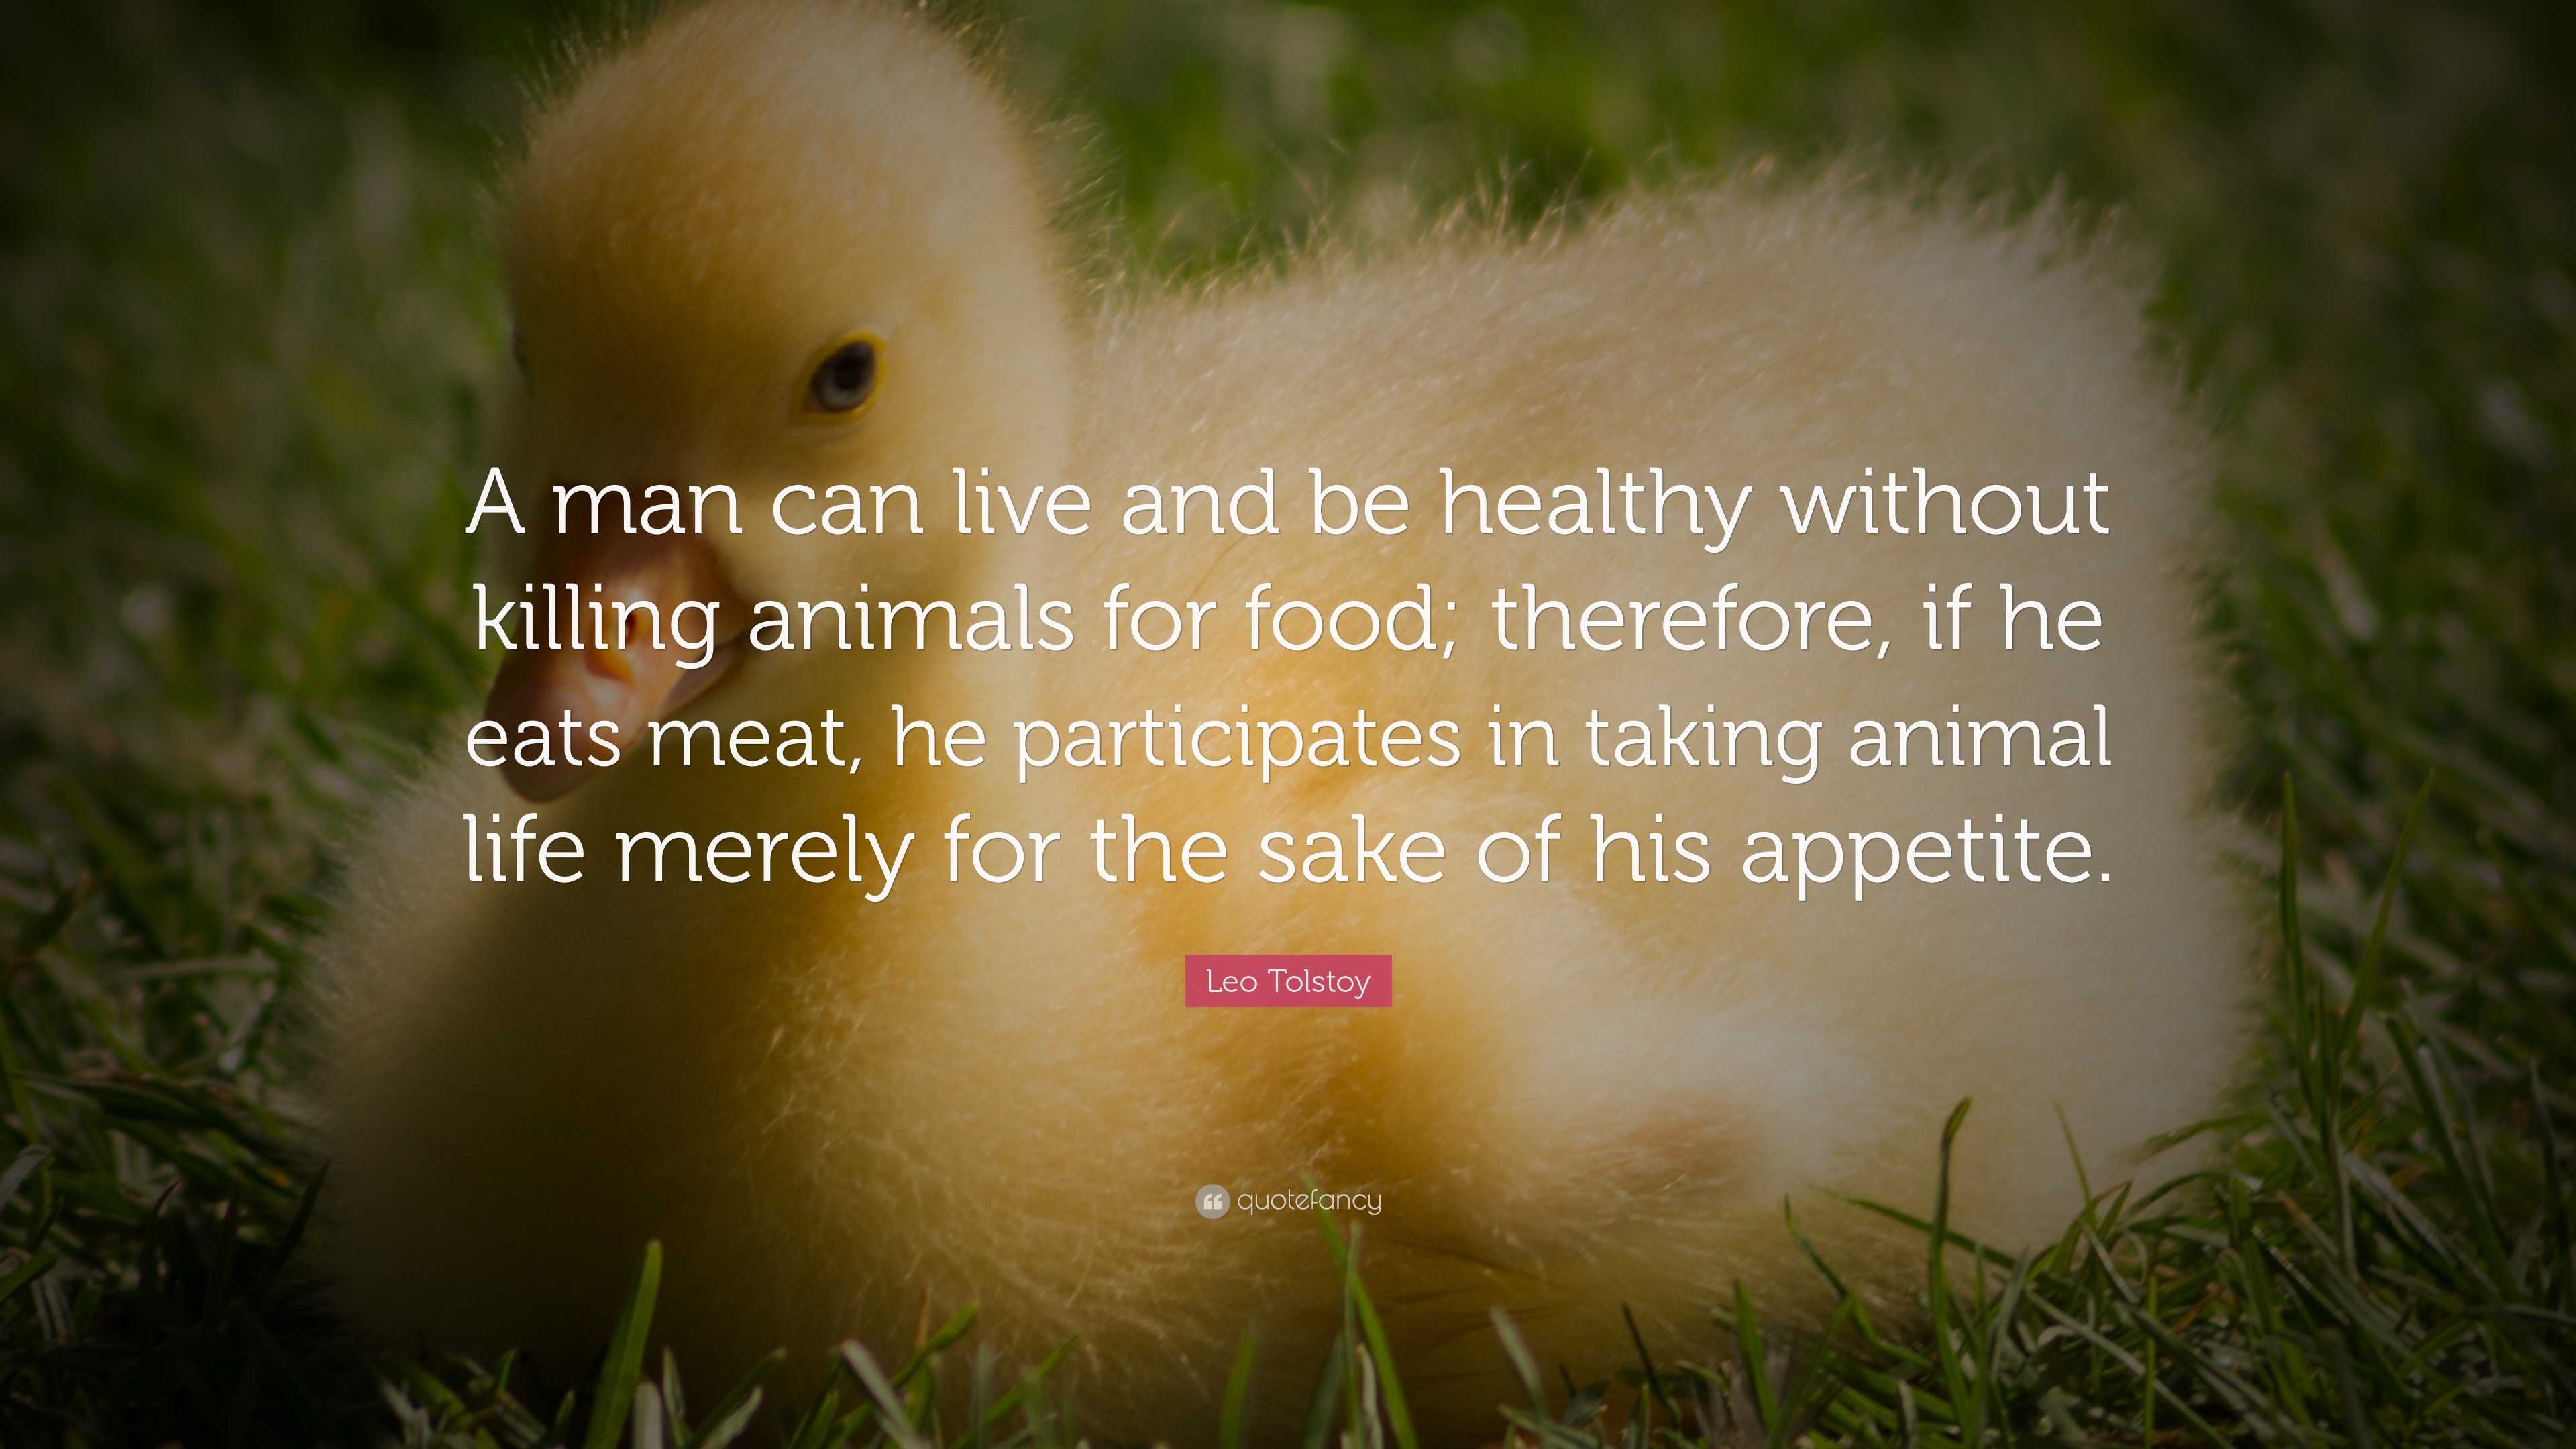 Leo Tolstoy Quote “A man can live and be healthy without killing animals for